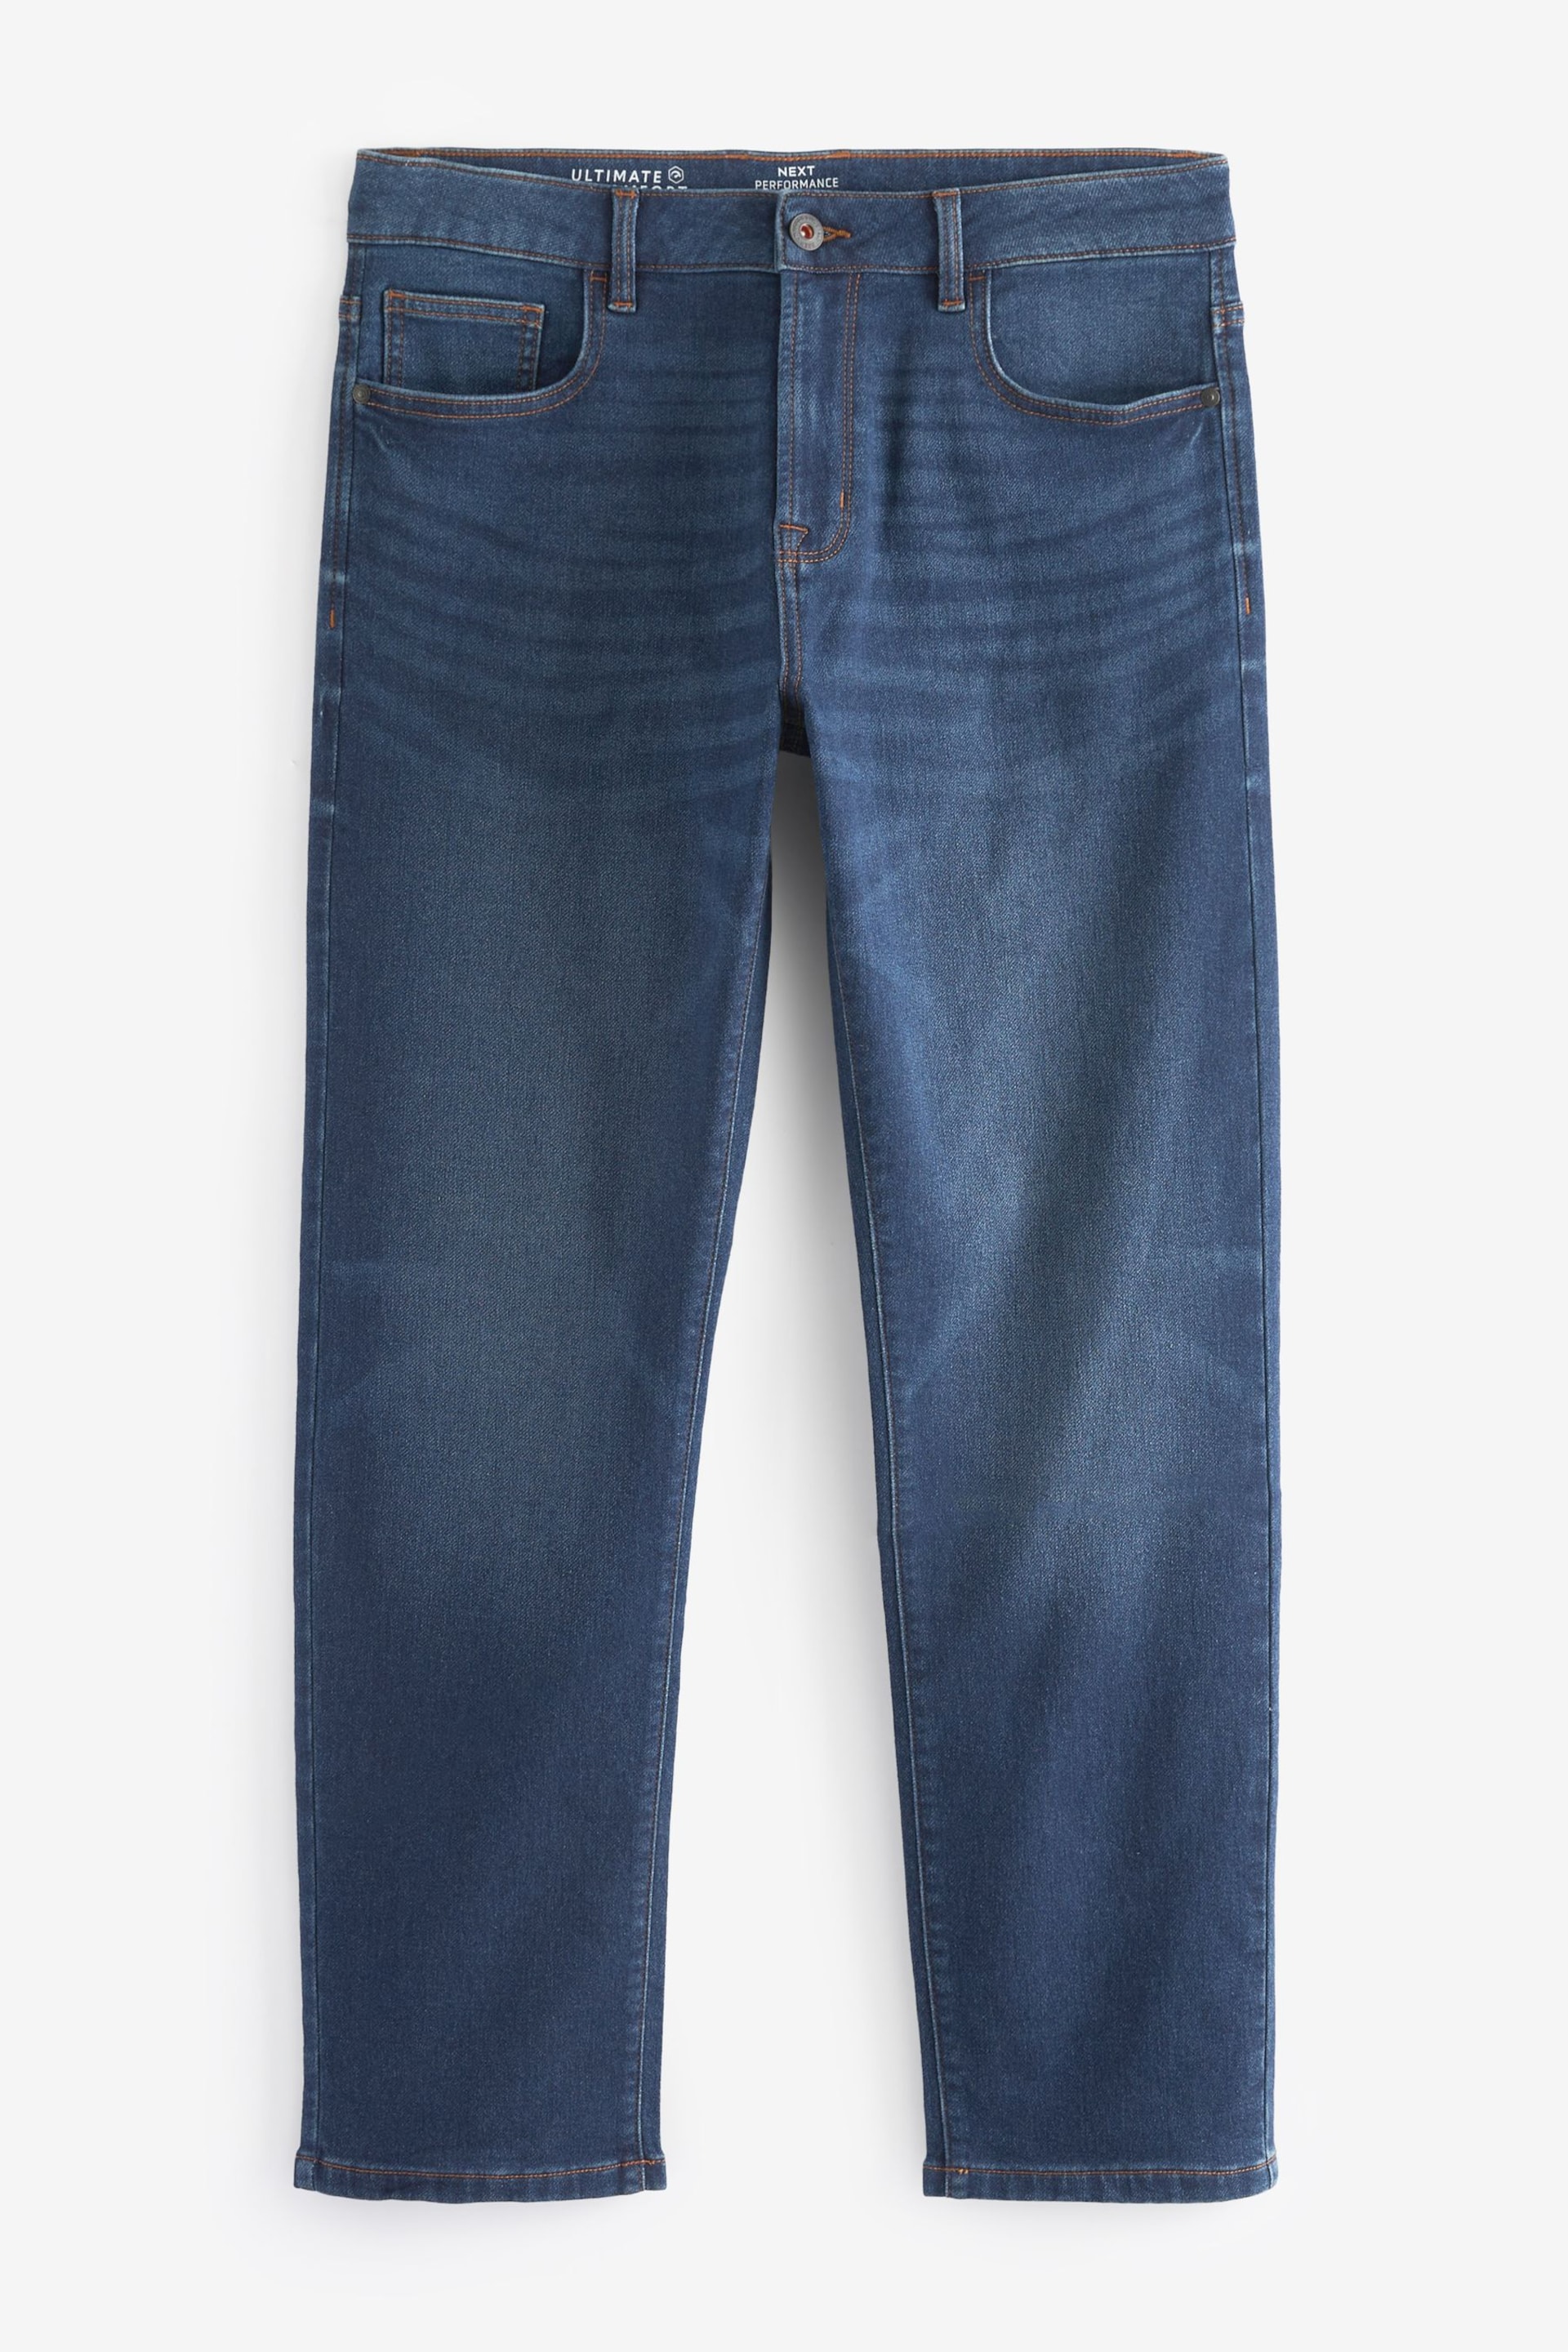 Blue Straight Fit Comfort Stretch Jeans - Image 7 of 10